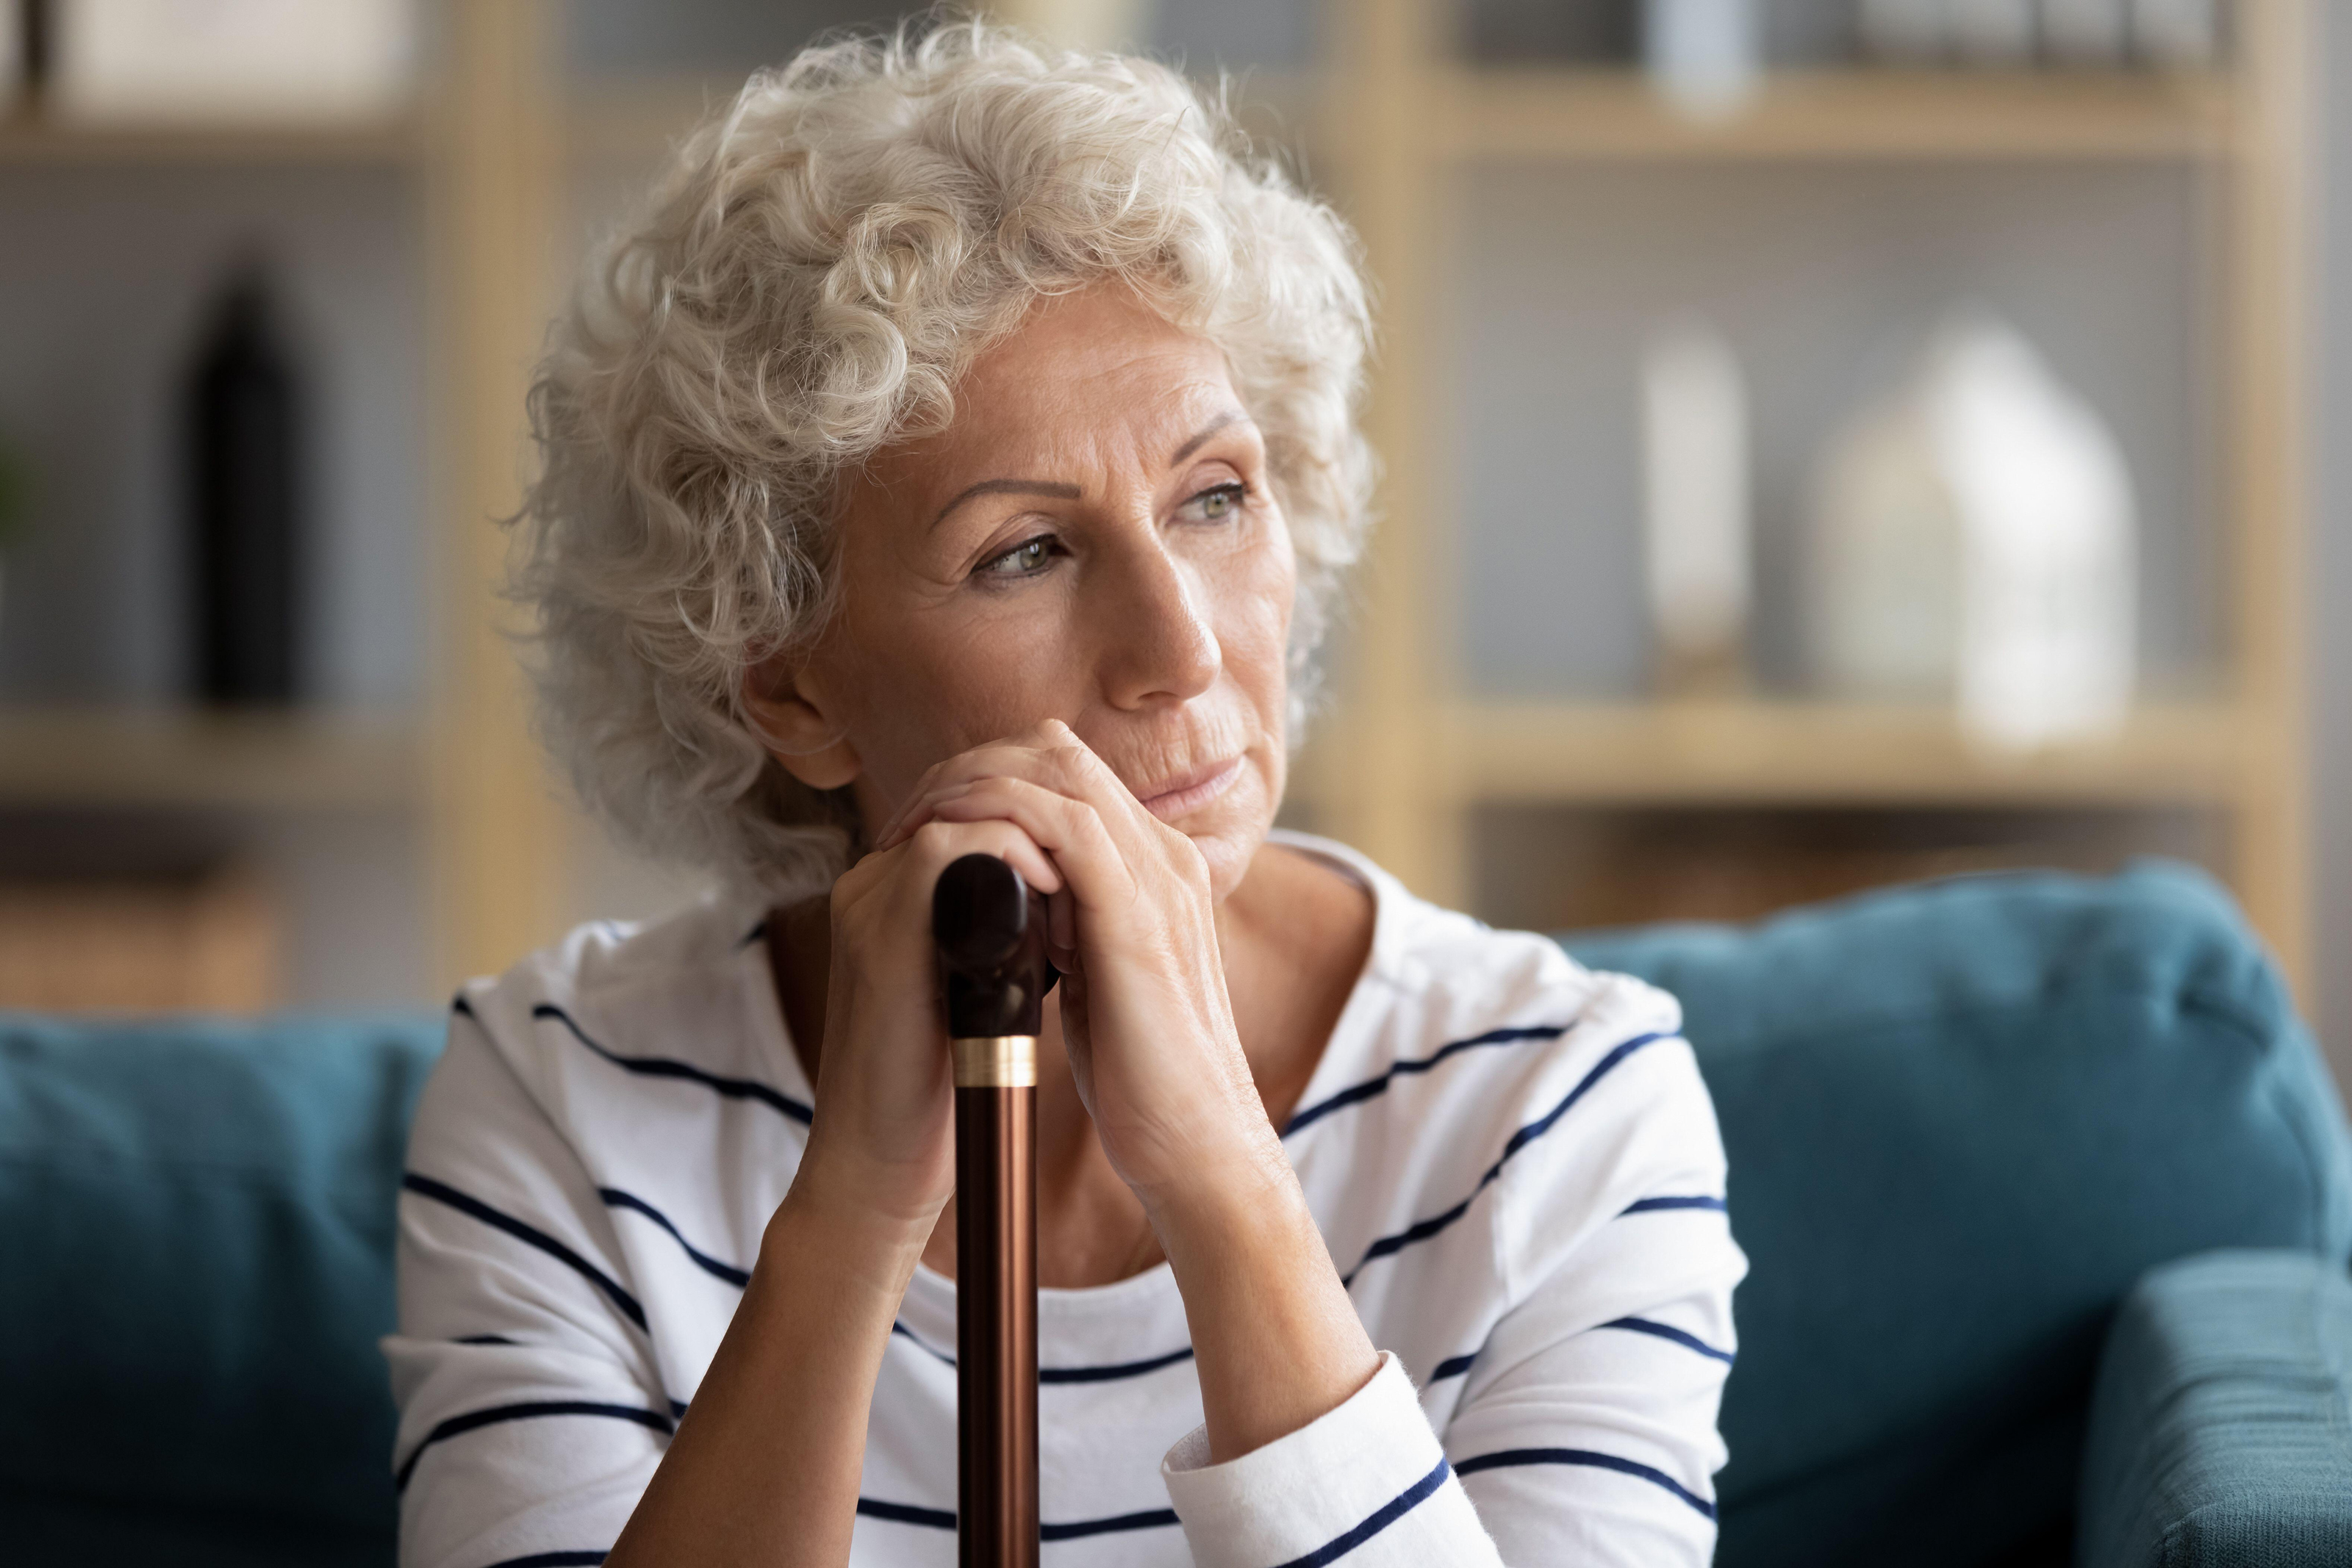 Mature woman deep in thought